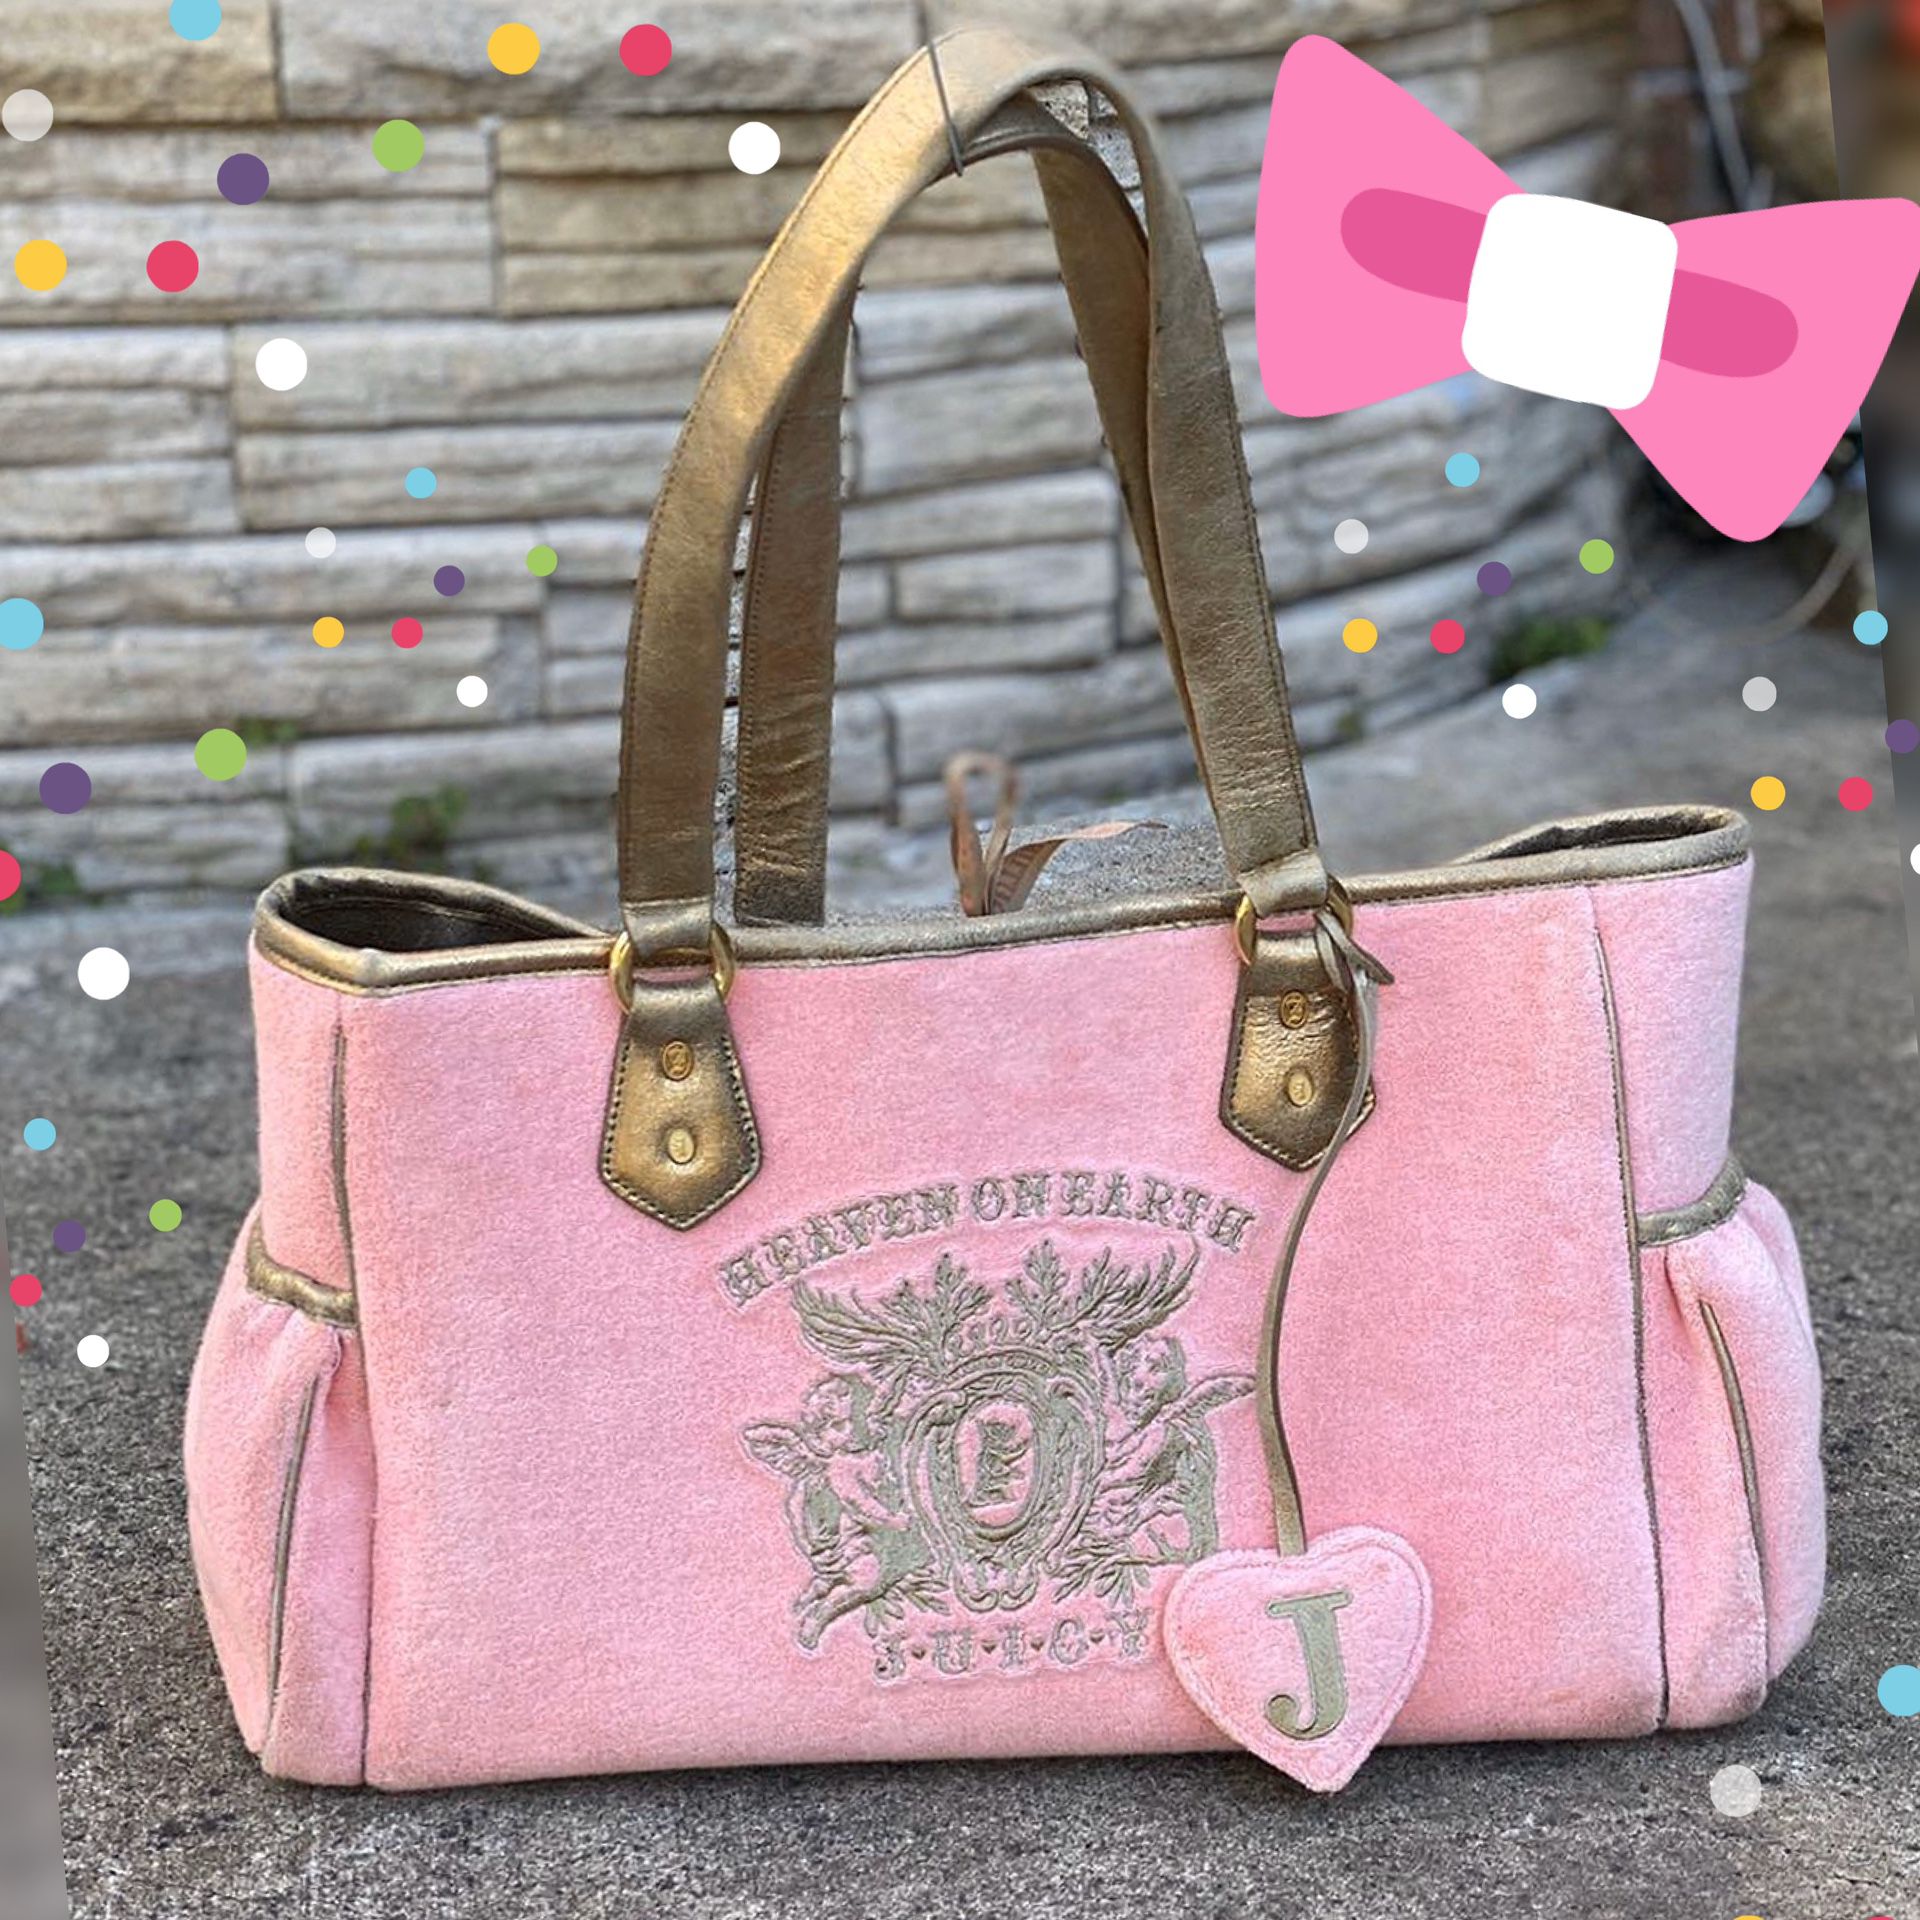 🎀 “Heaven on Earth” Authentic Juicy Couture Baby Precious Pink *Rare to find* Velour Diaper Bag